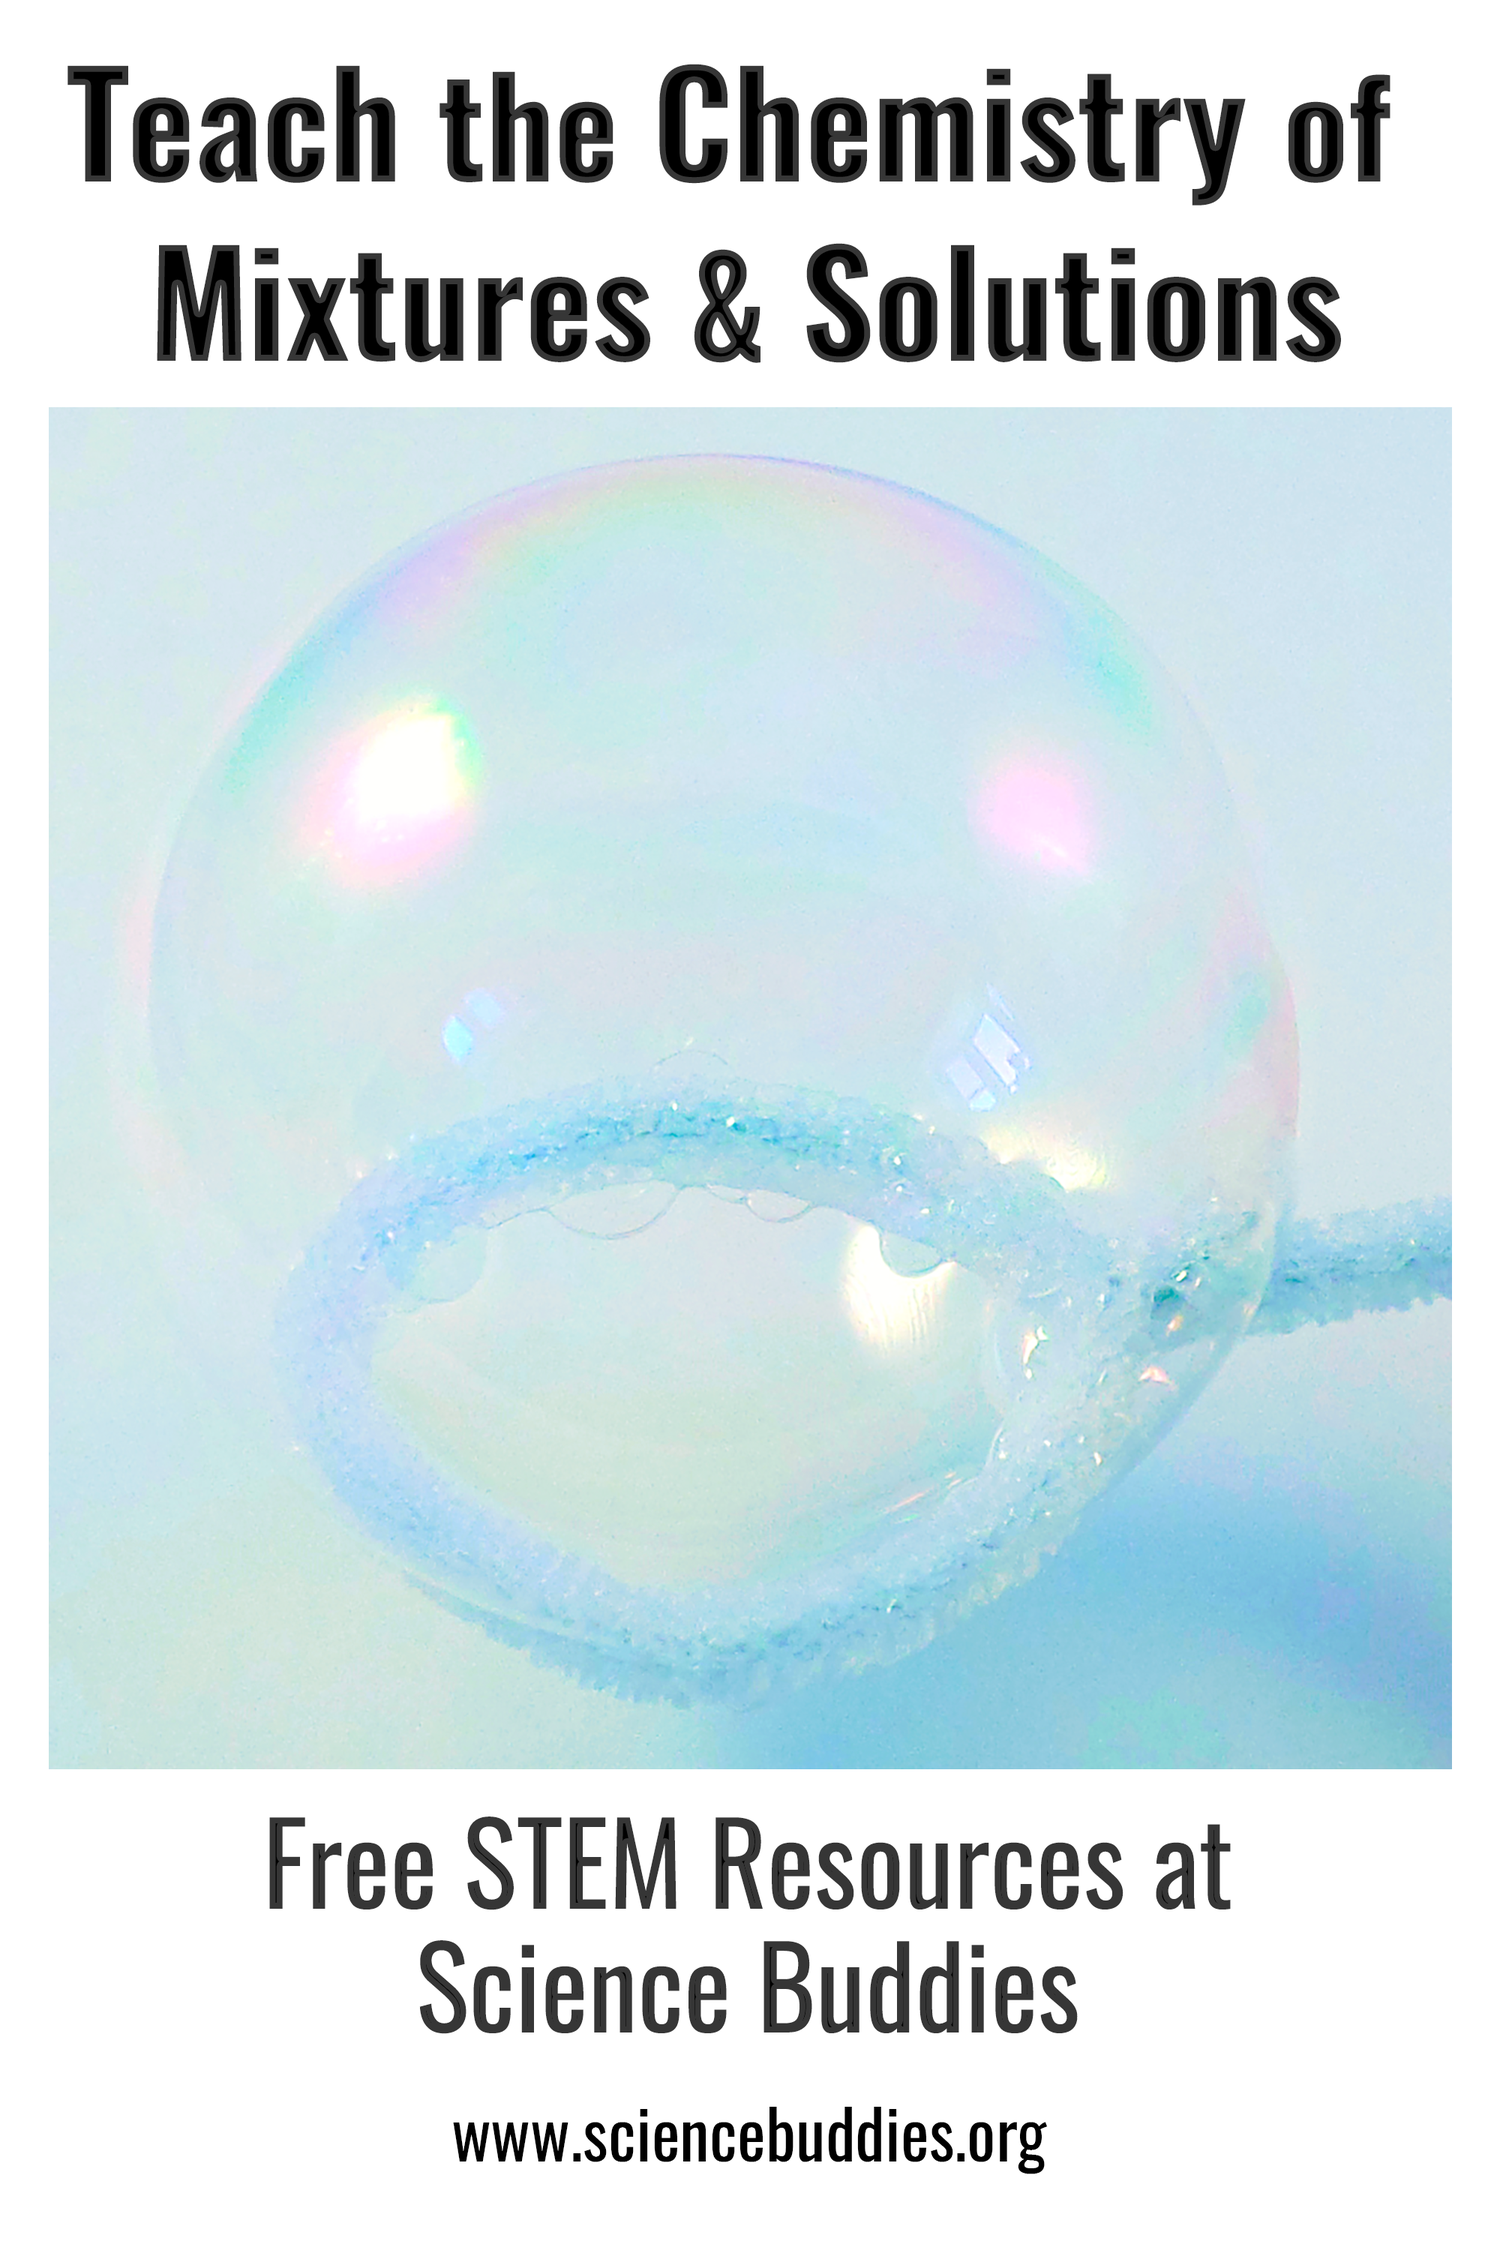 Teach Chemistry of Mixtures and Solutions - Large bubble from bubble activity